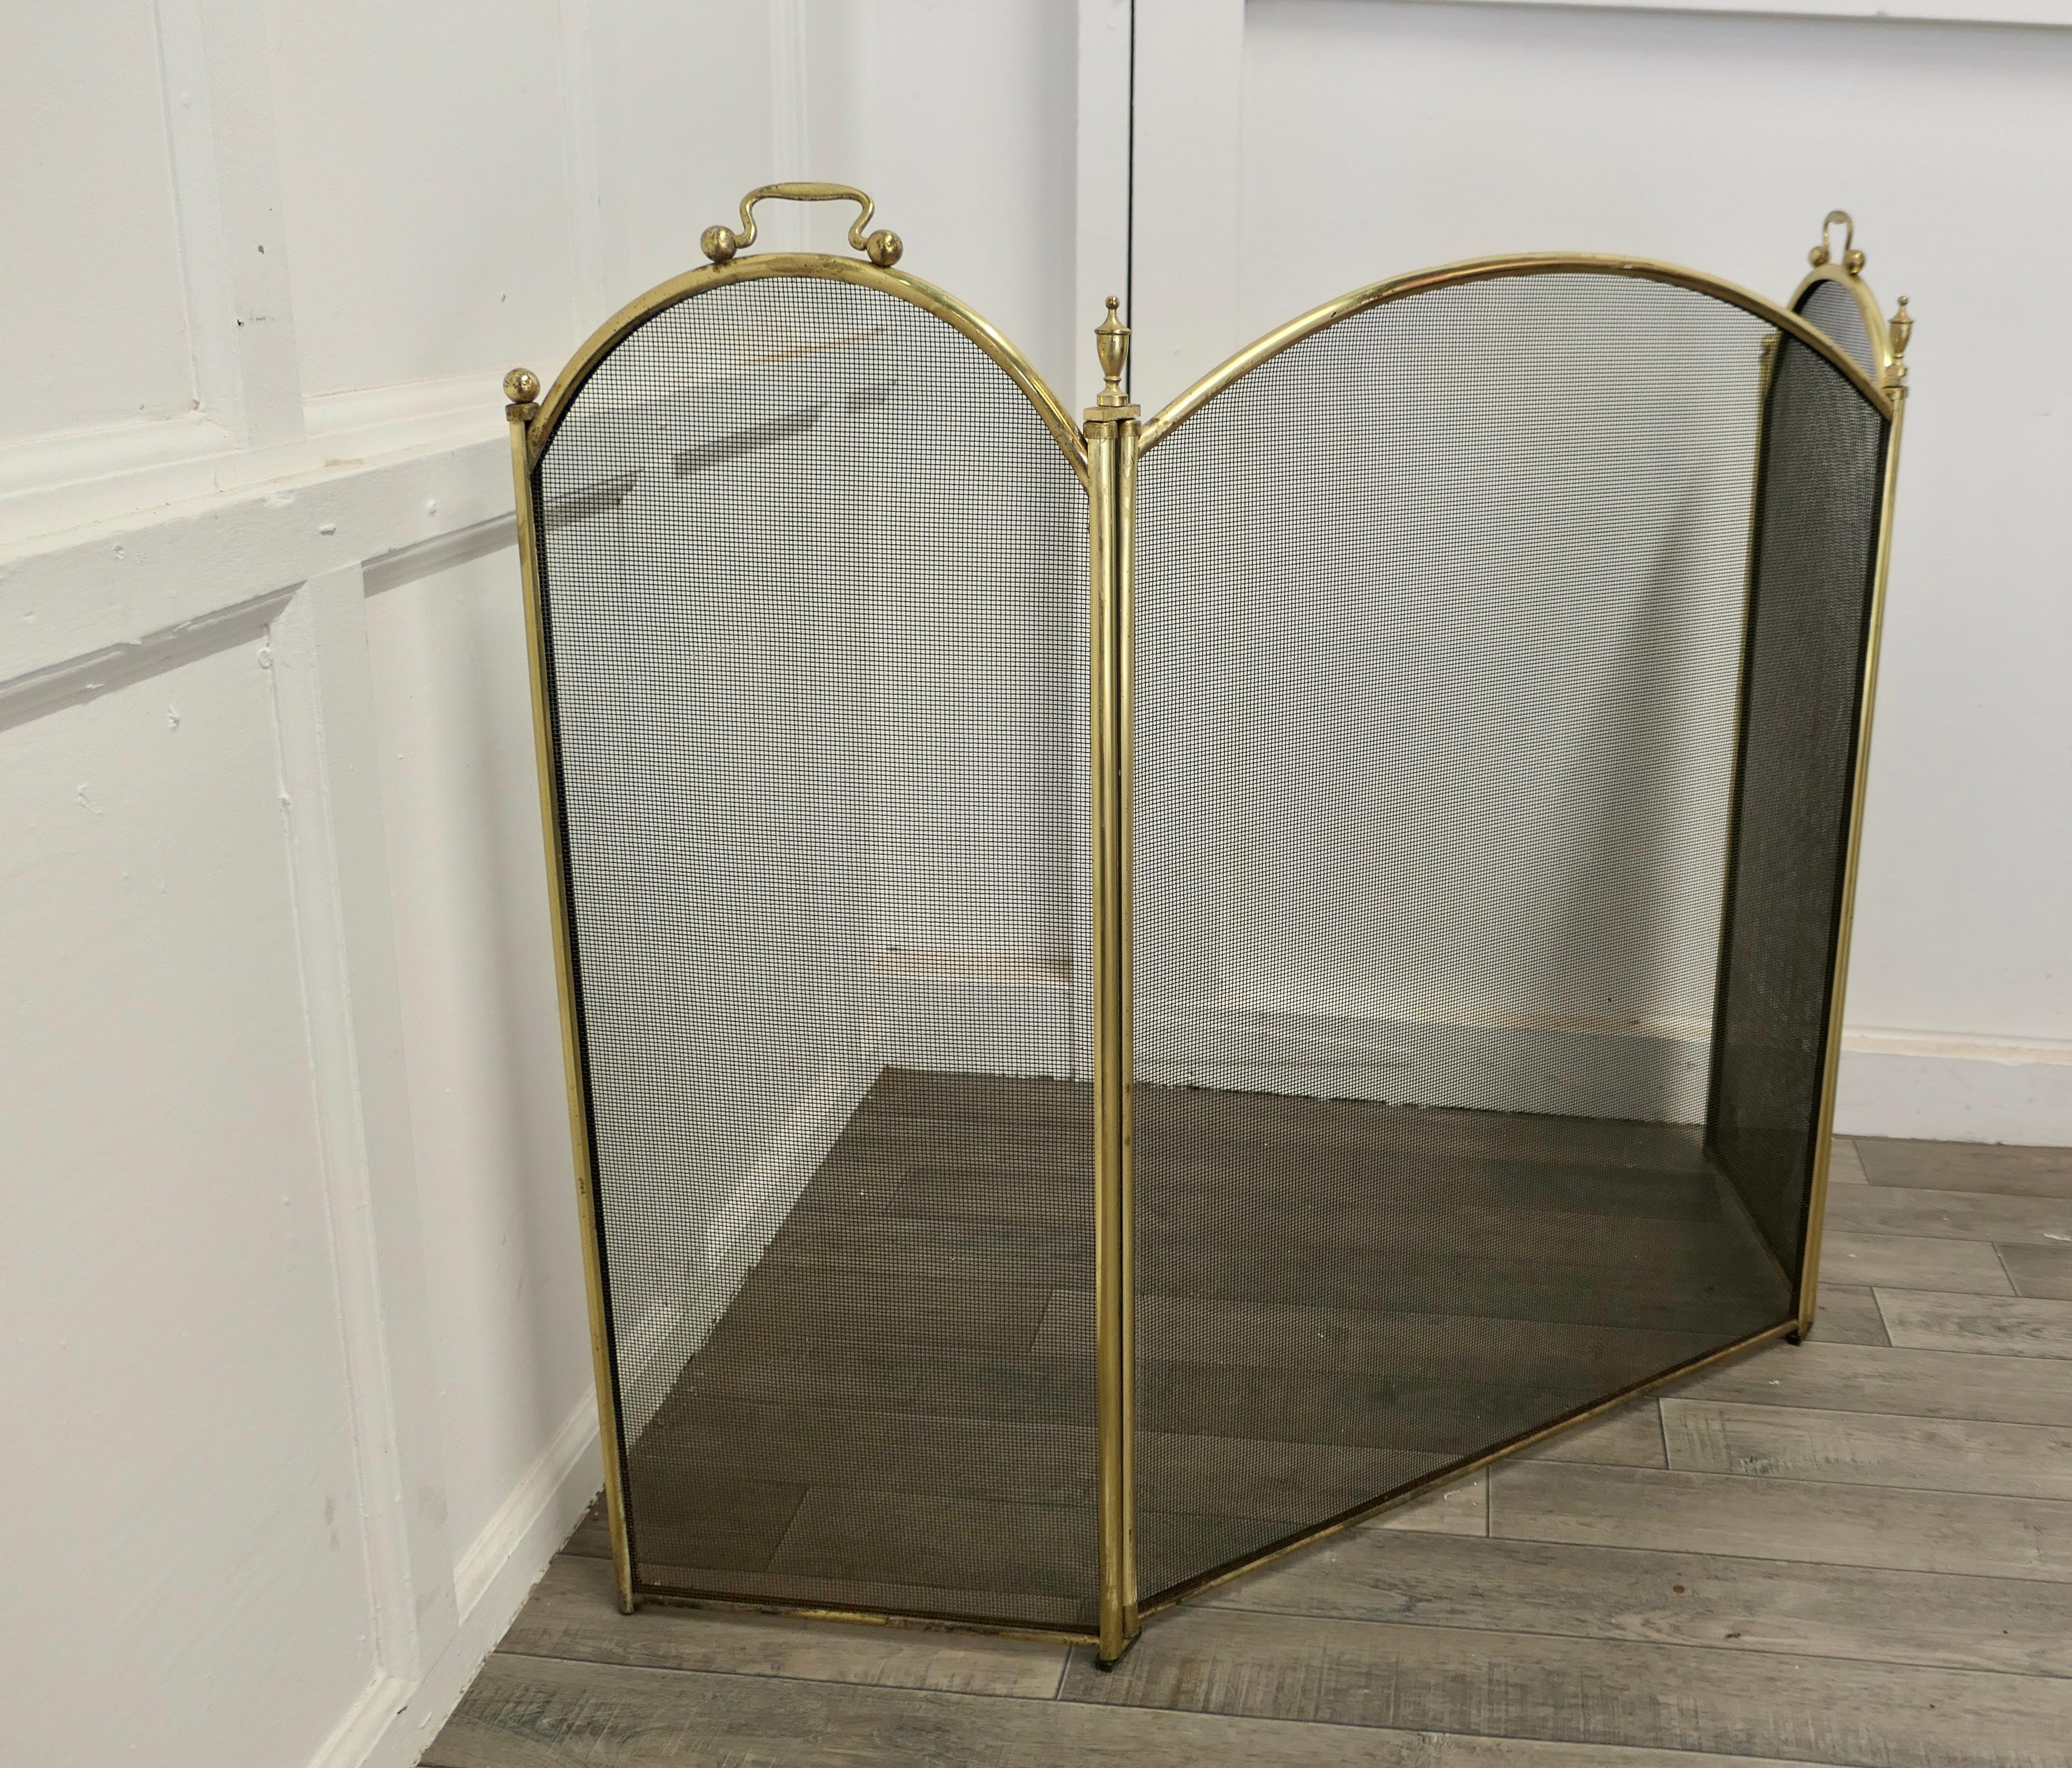 20th Century Very Large Folding Brass and Iron Fire Guard for Inglenook Fireplace   